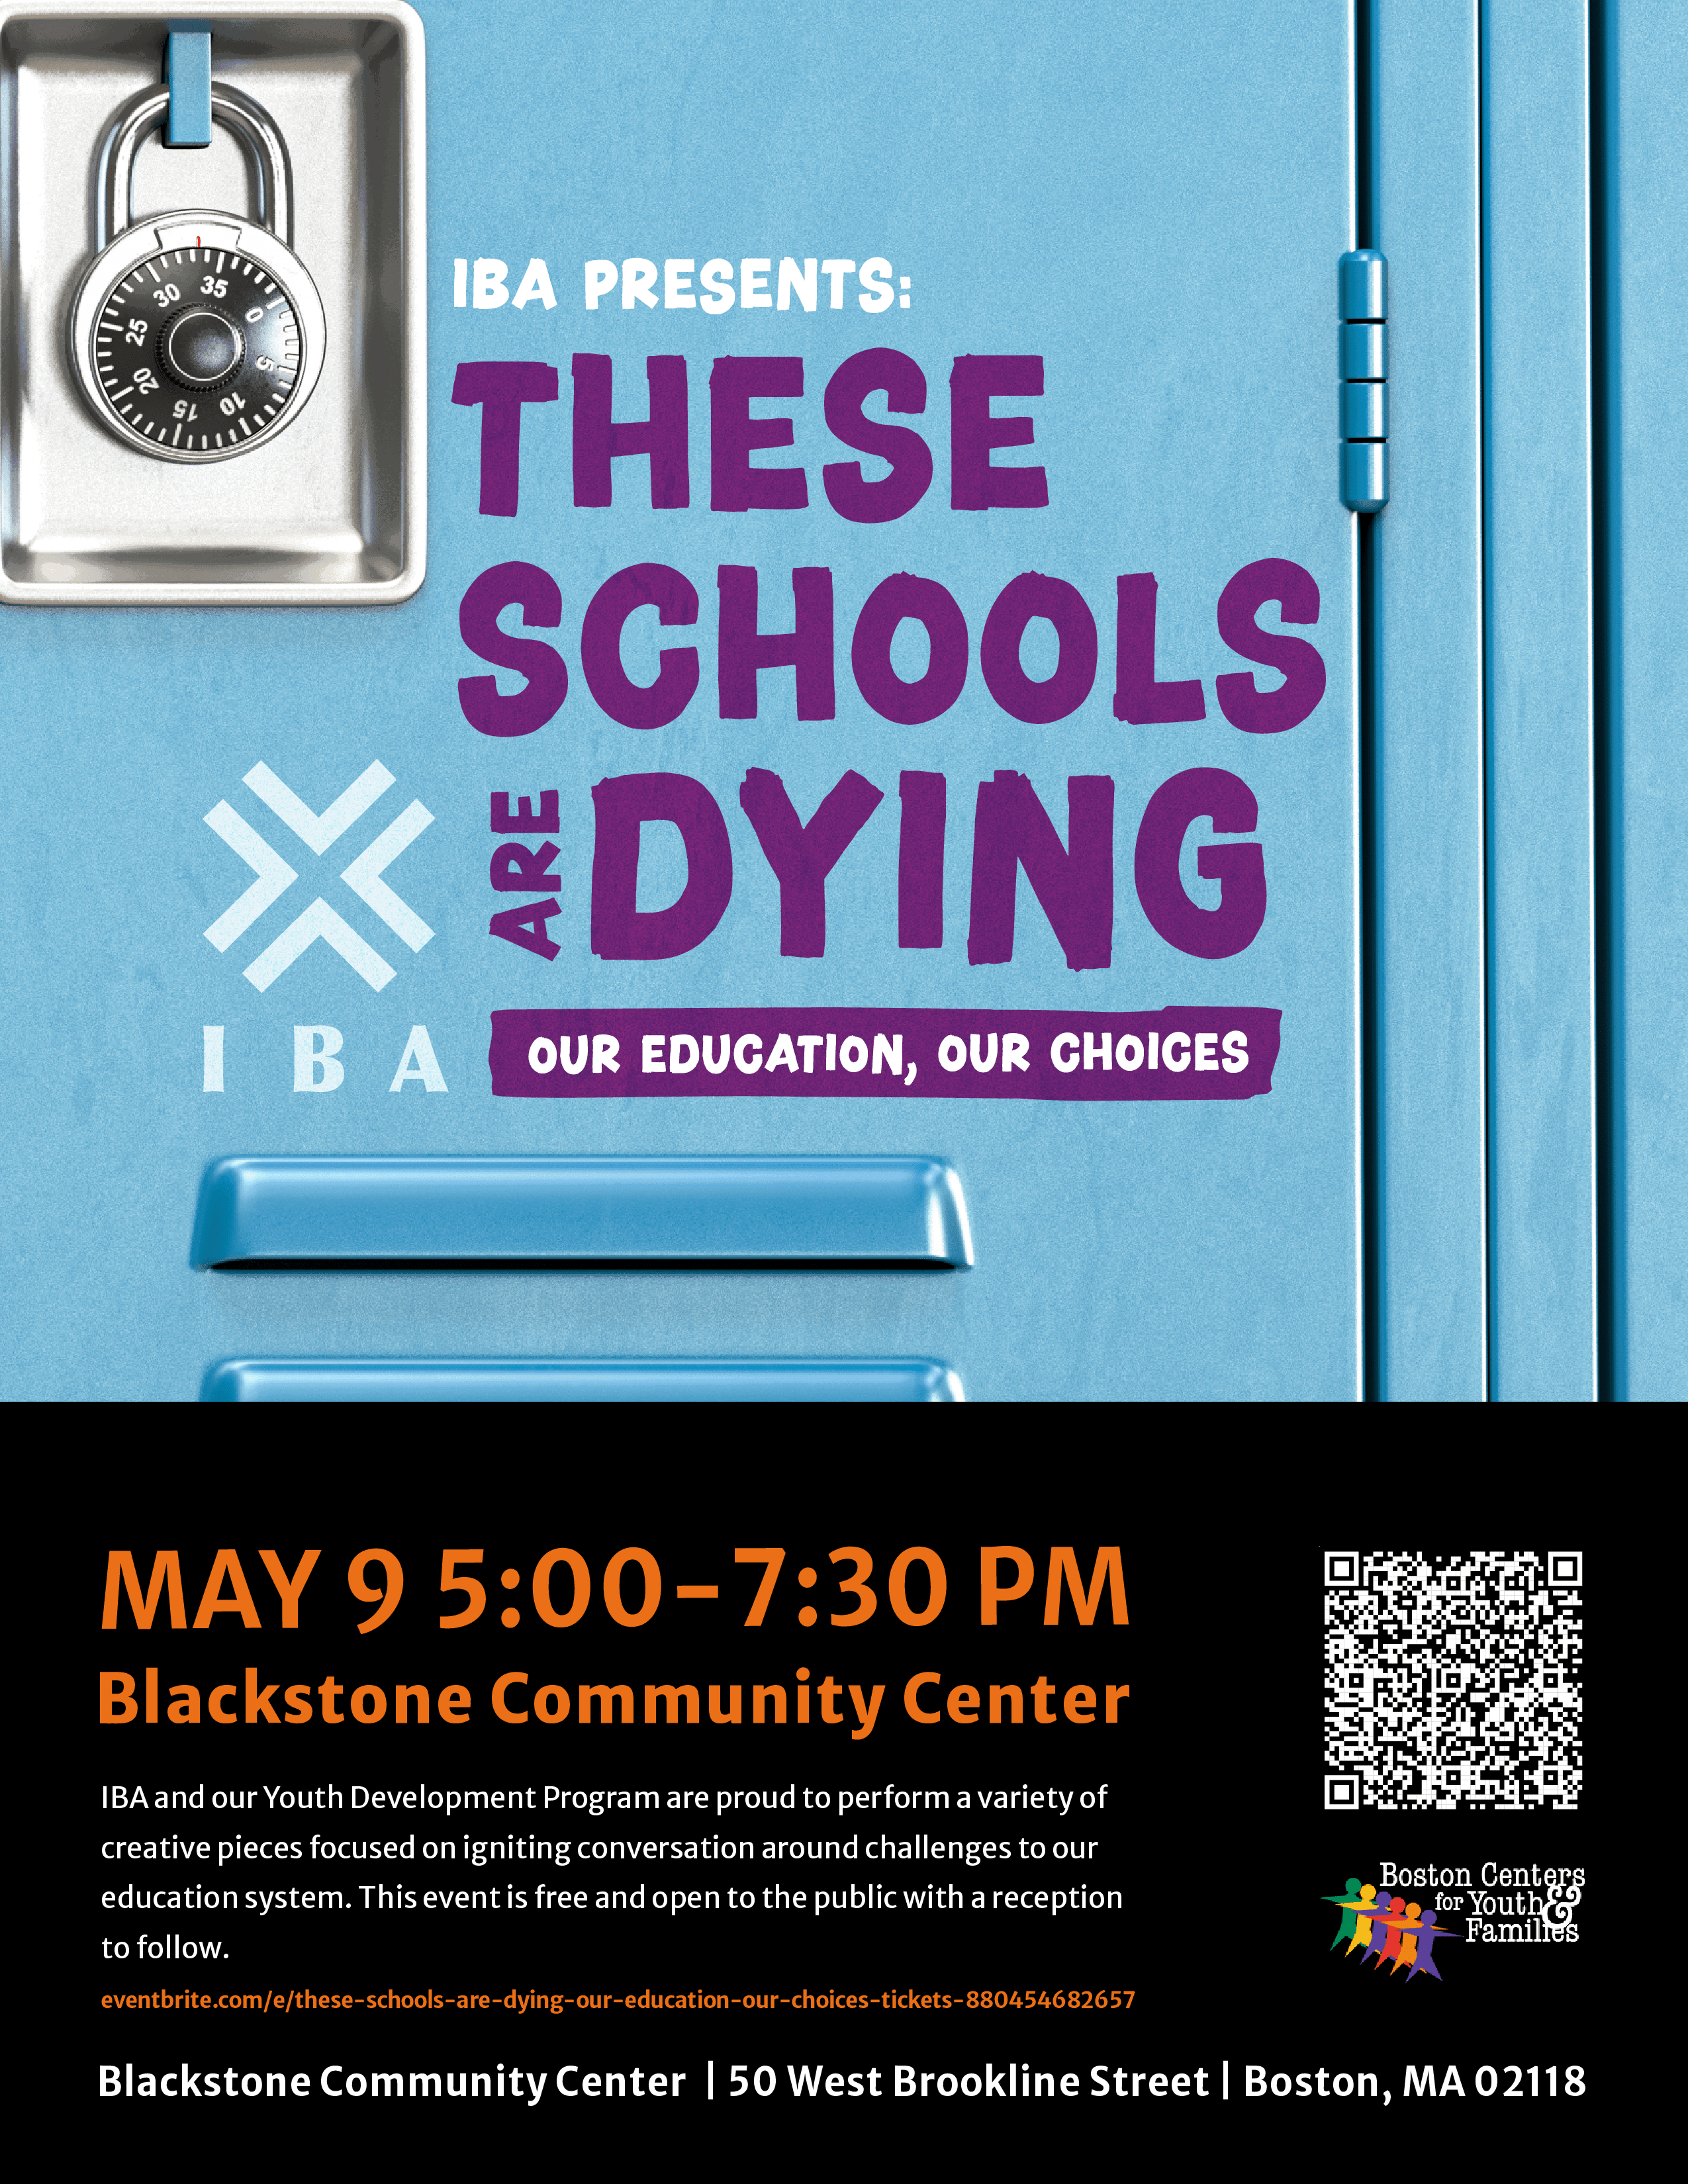 IBA PRESENTS: THESE SCHOOLS ARE DYING